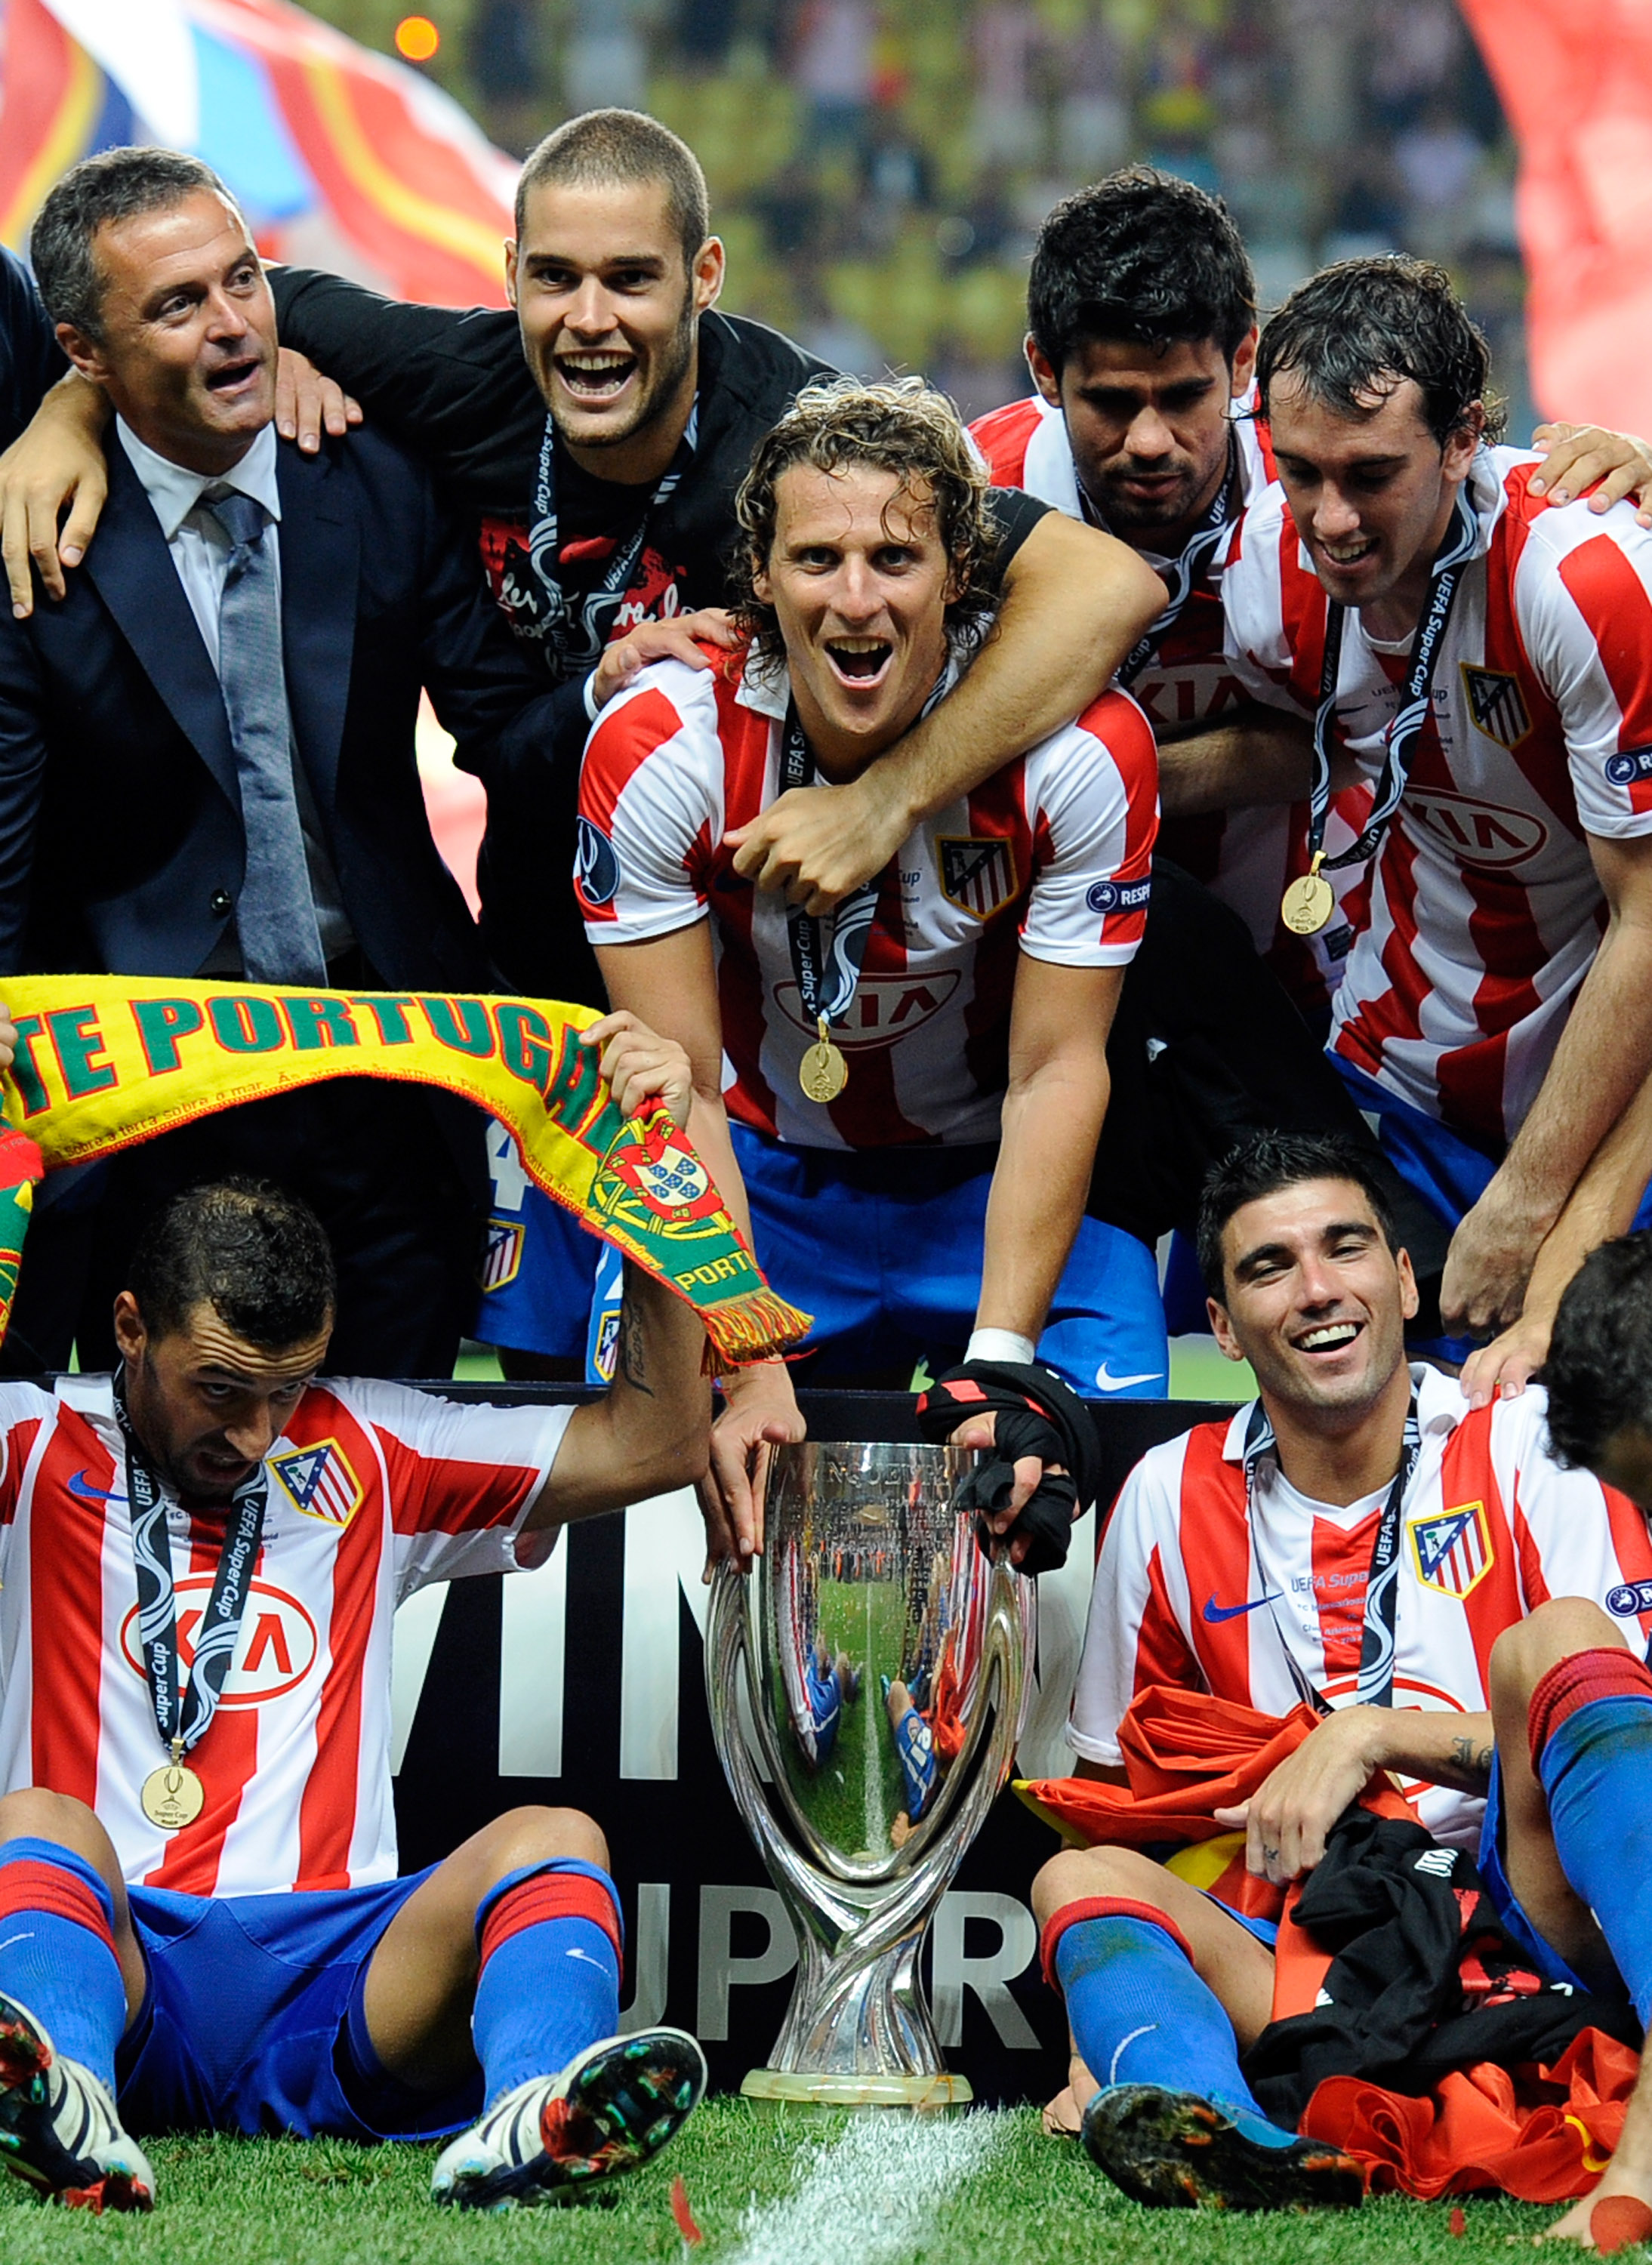 MONACO - AUGUST 27:  Diego Forlan of Atletico Madrid celebrates with team mates after winning the UEFA Super Cup between Inter and Atletico Madrid at Louis II Stadium on August 27, 2010 in Monaco, Monaco.  (Photo by Claudio Villa/Getty Images)